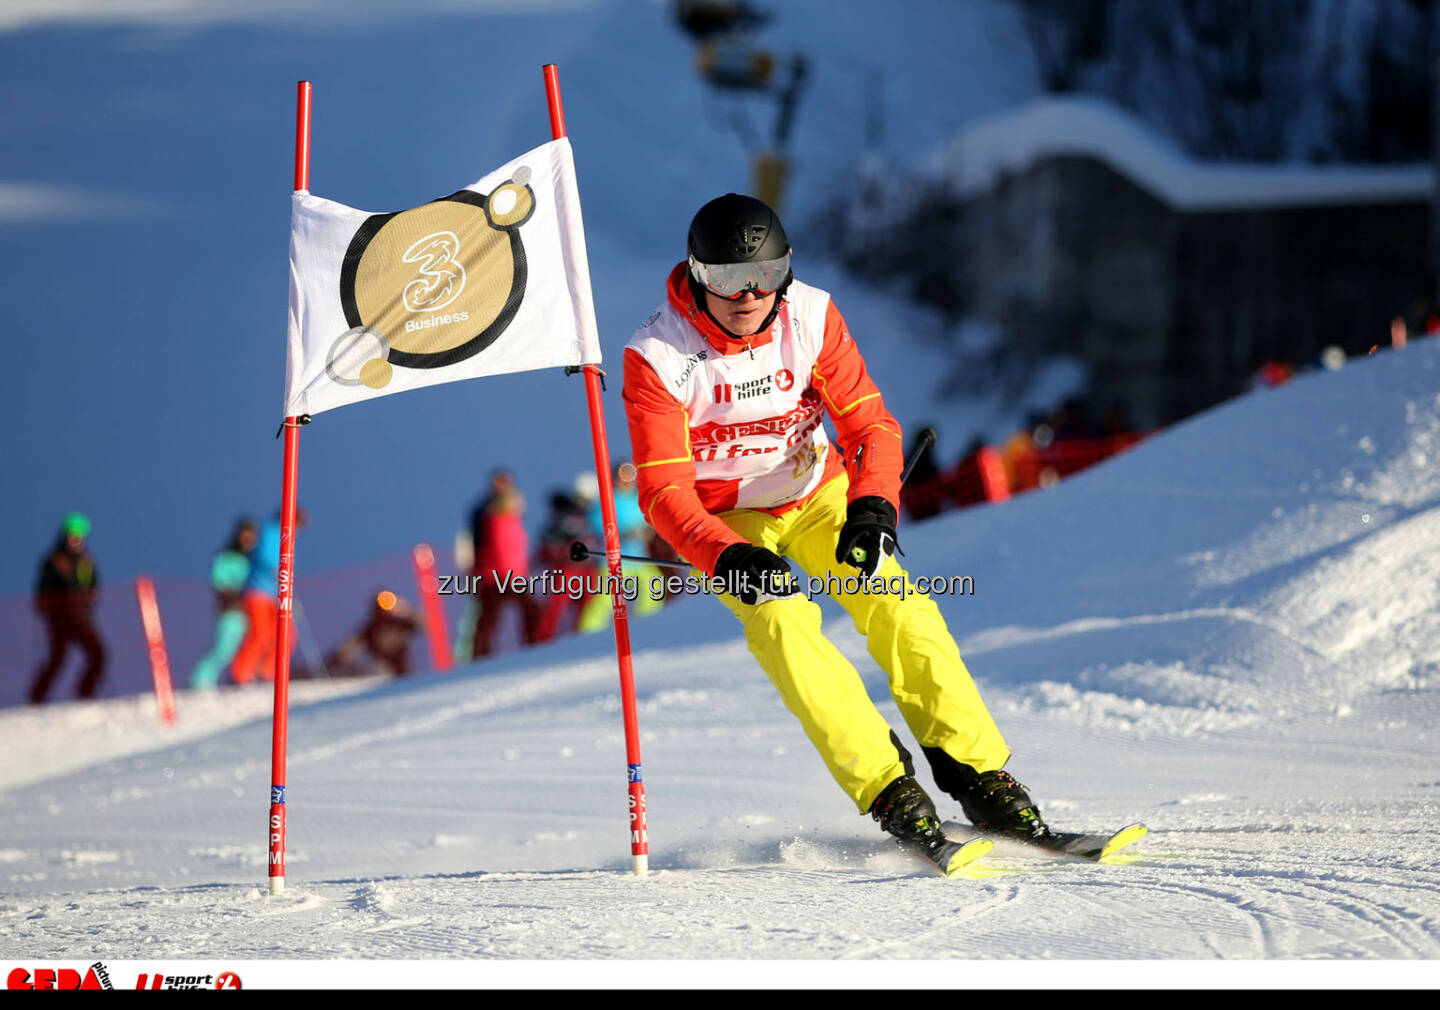 Ski for Gold Charity Race. Image shows Toni Polster. Photo: GEPA pictures/ Daniel Goetzhaber